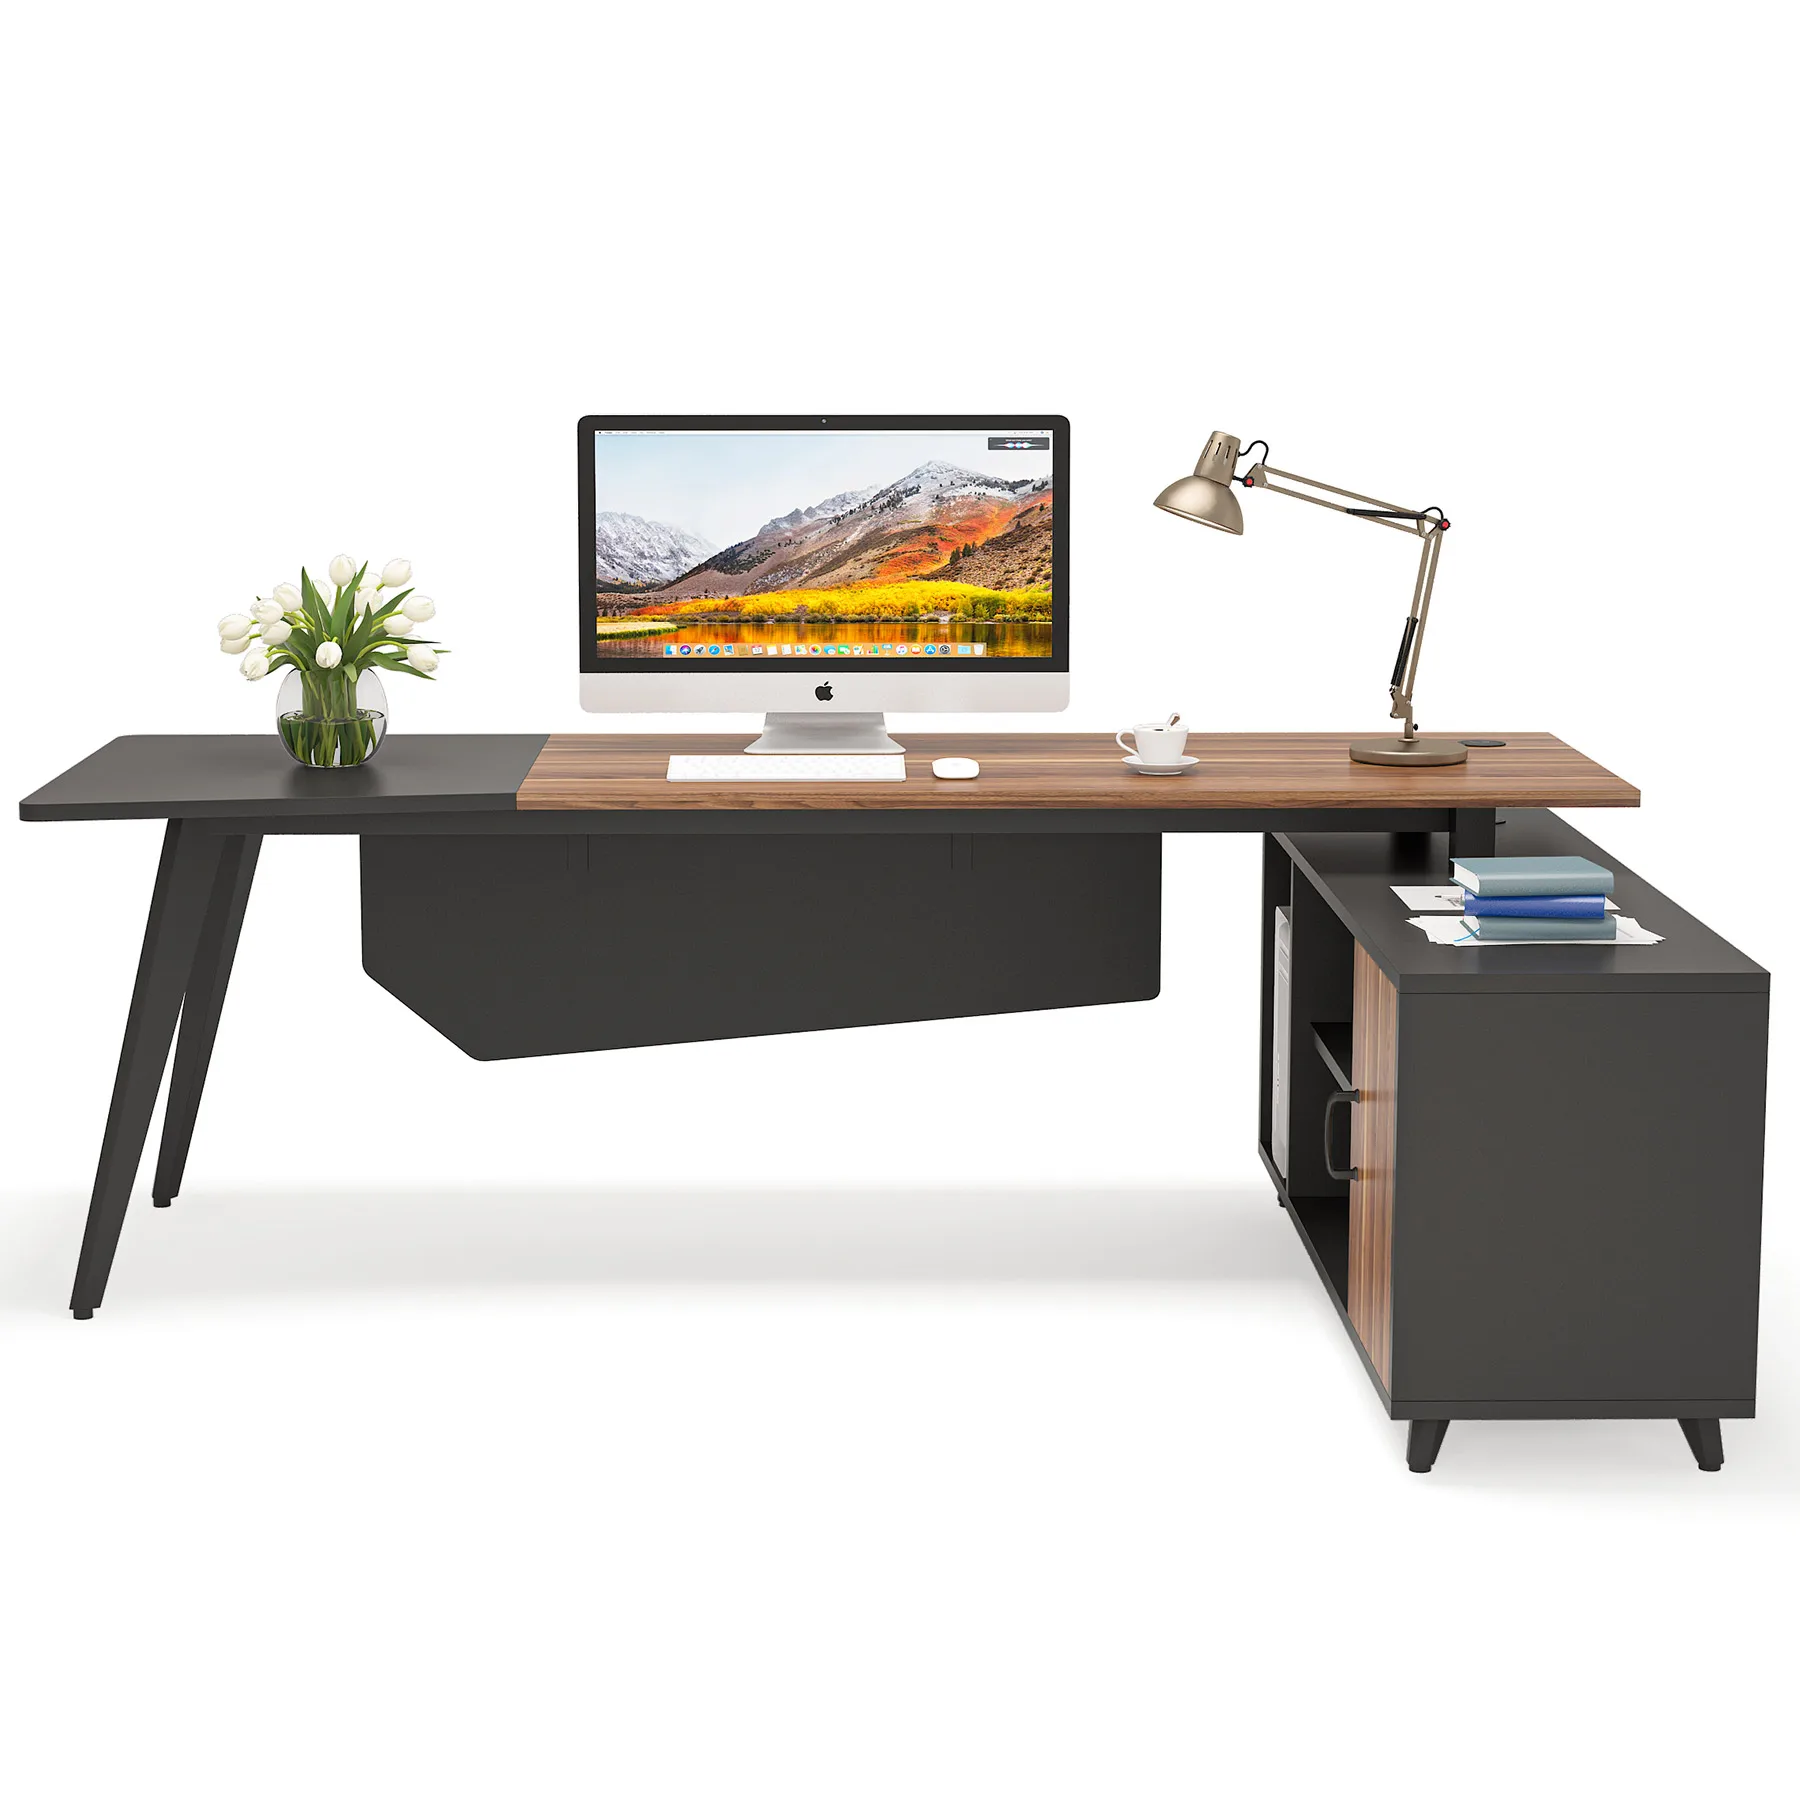 Ready Made Desk Home Office Desktop Computer Working Table For Office Work